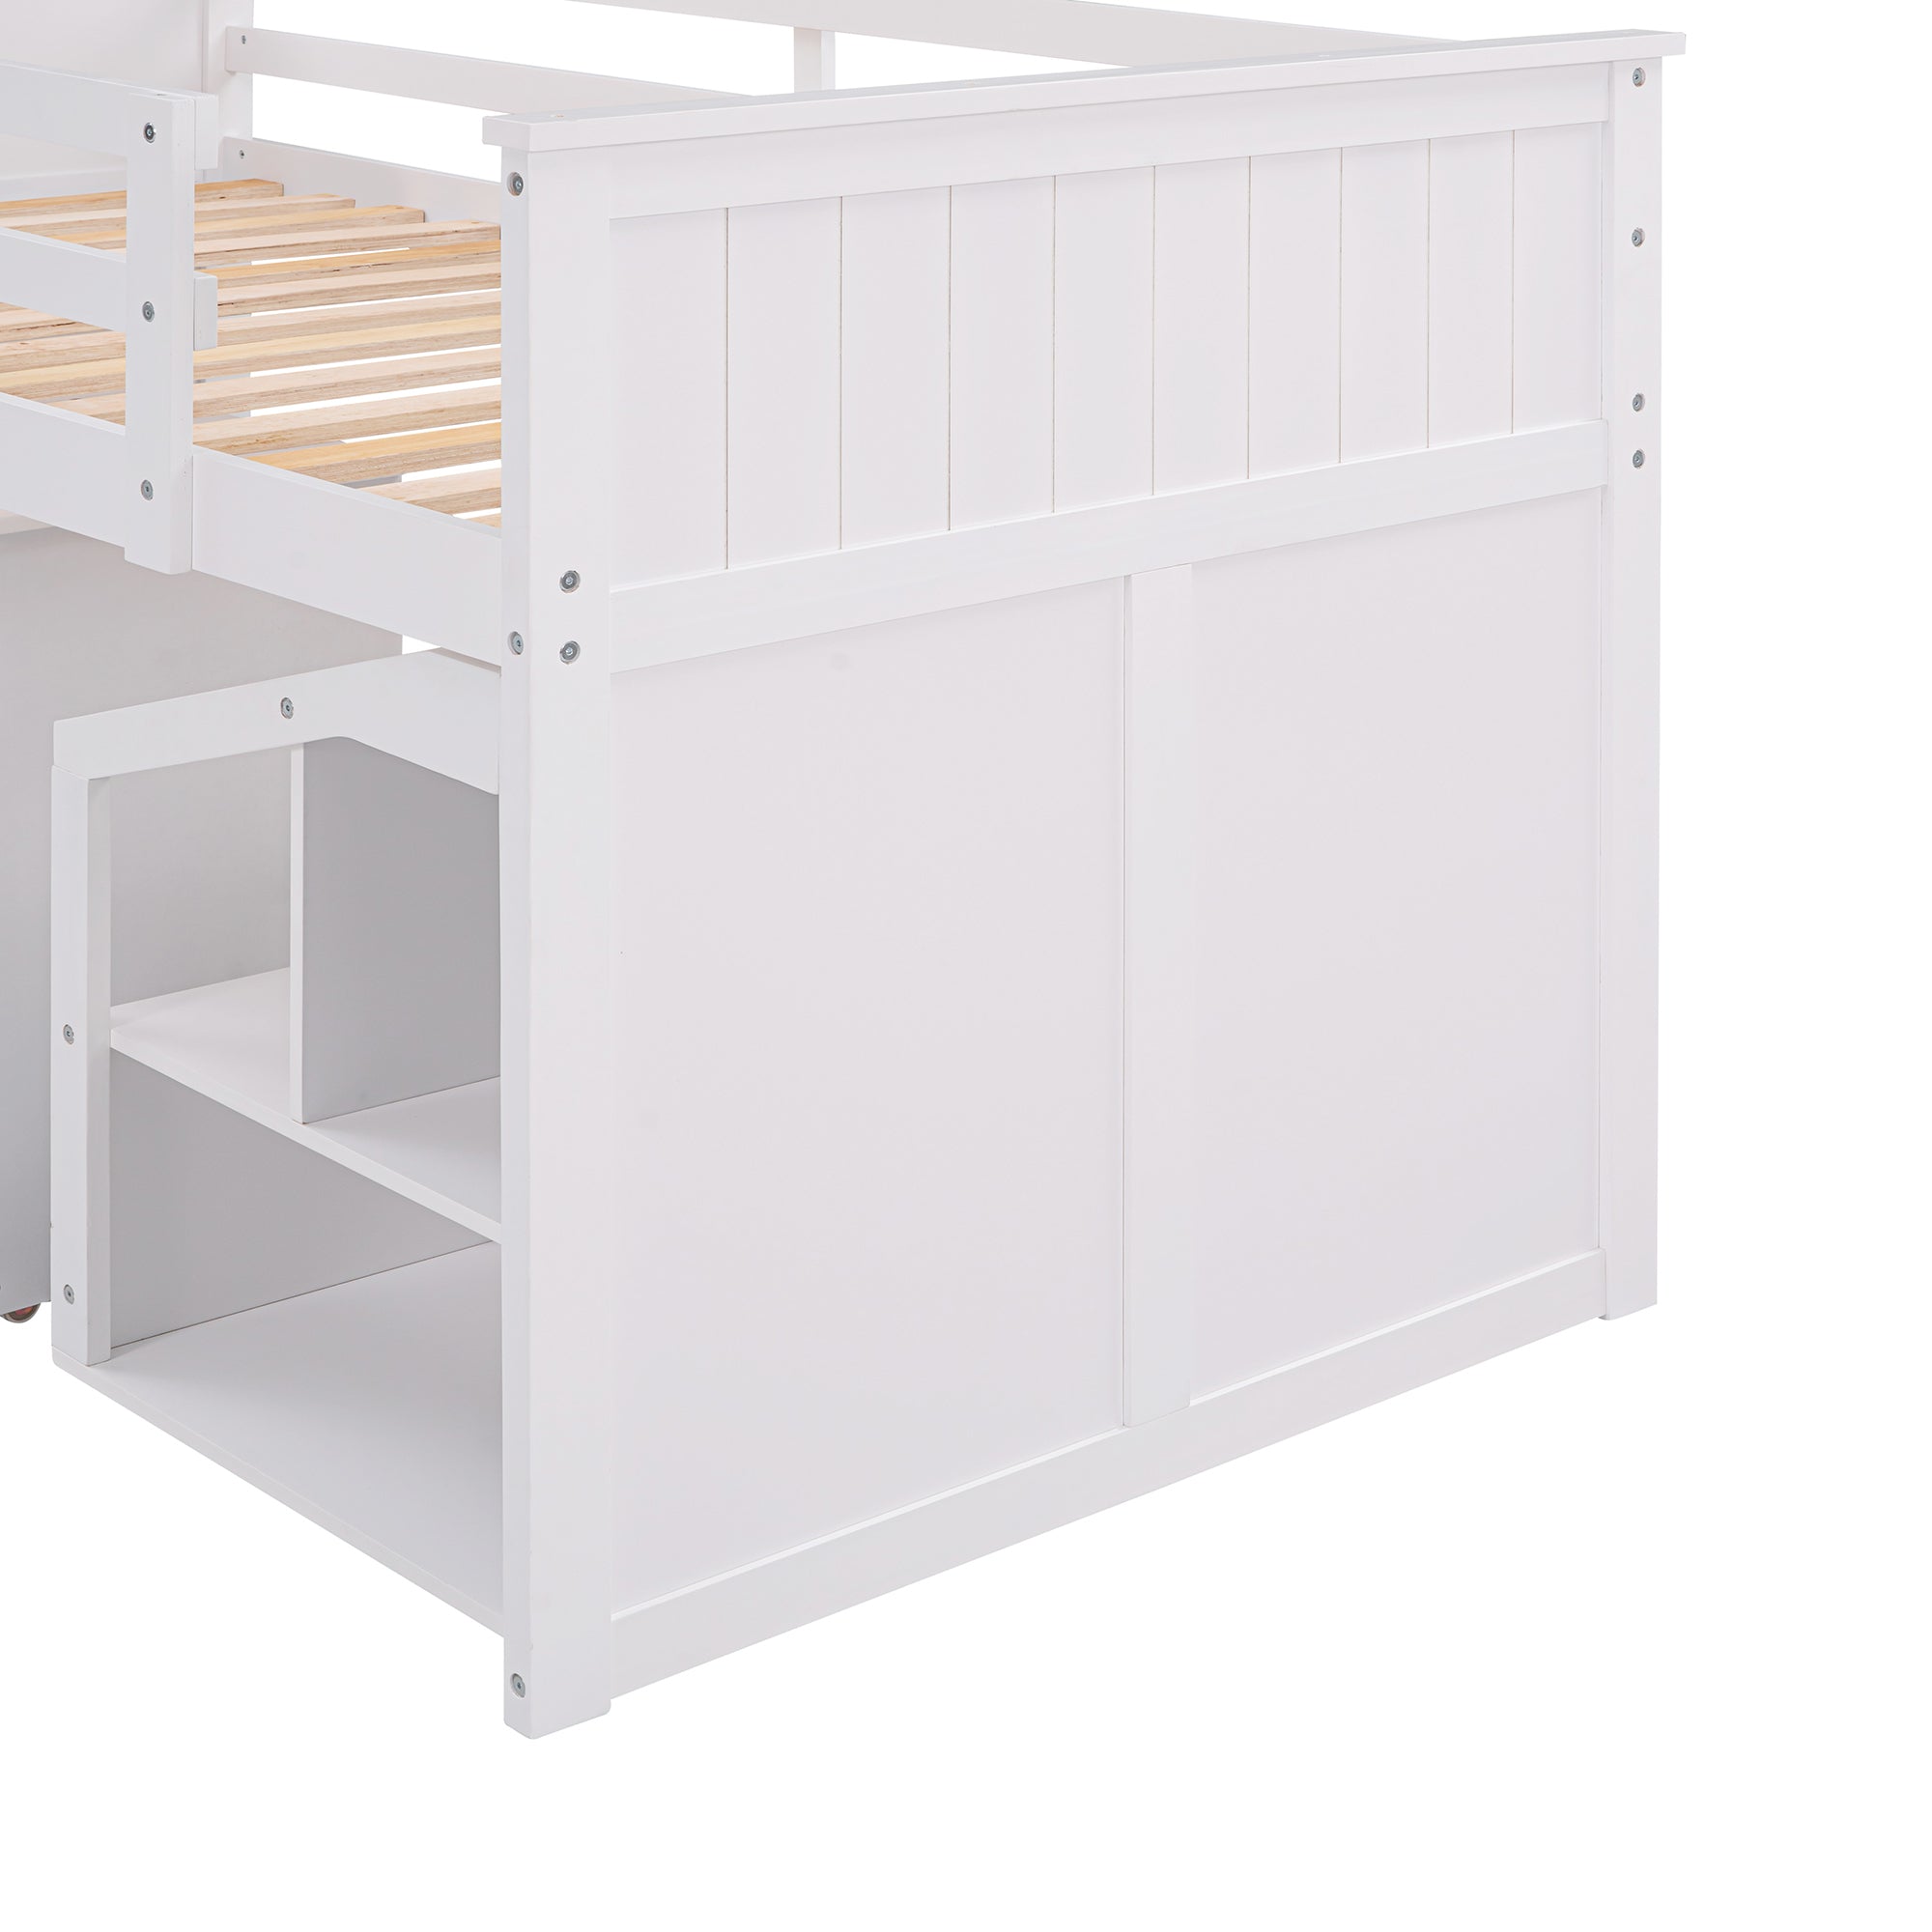 Loft Bed Low Study Twin Size Loft Bed With Storage Steps and Portable (White)